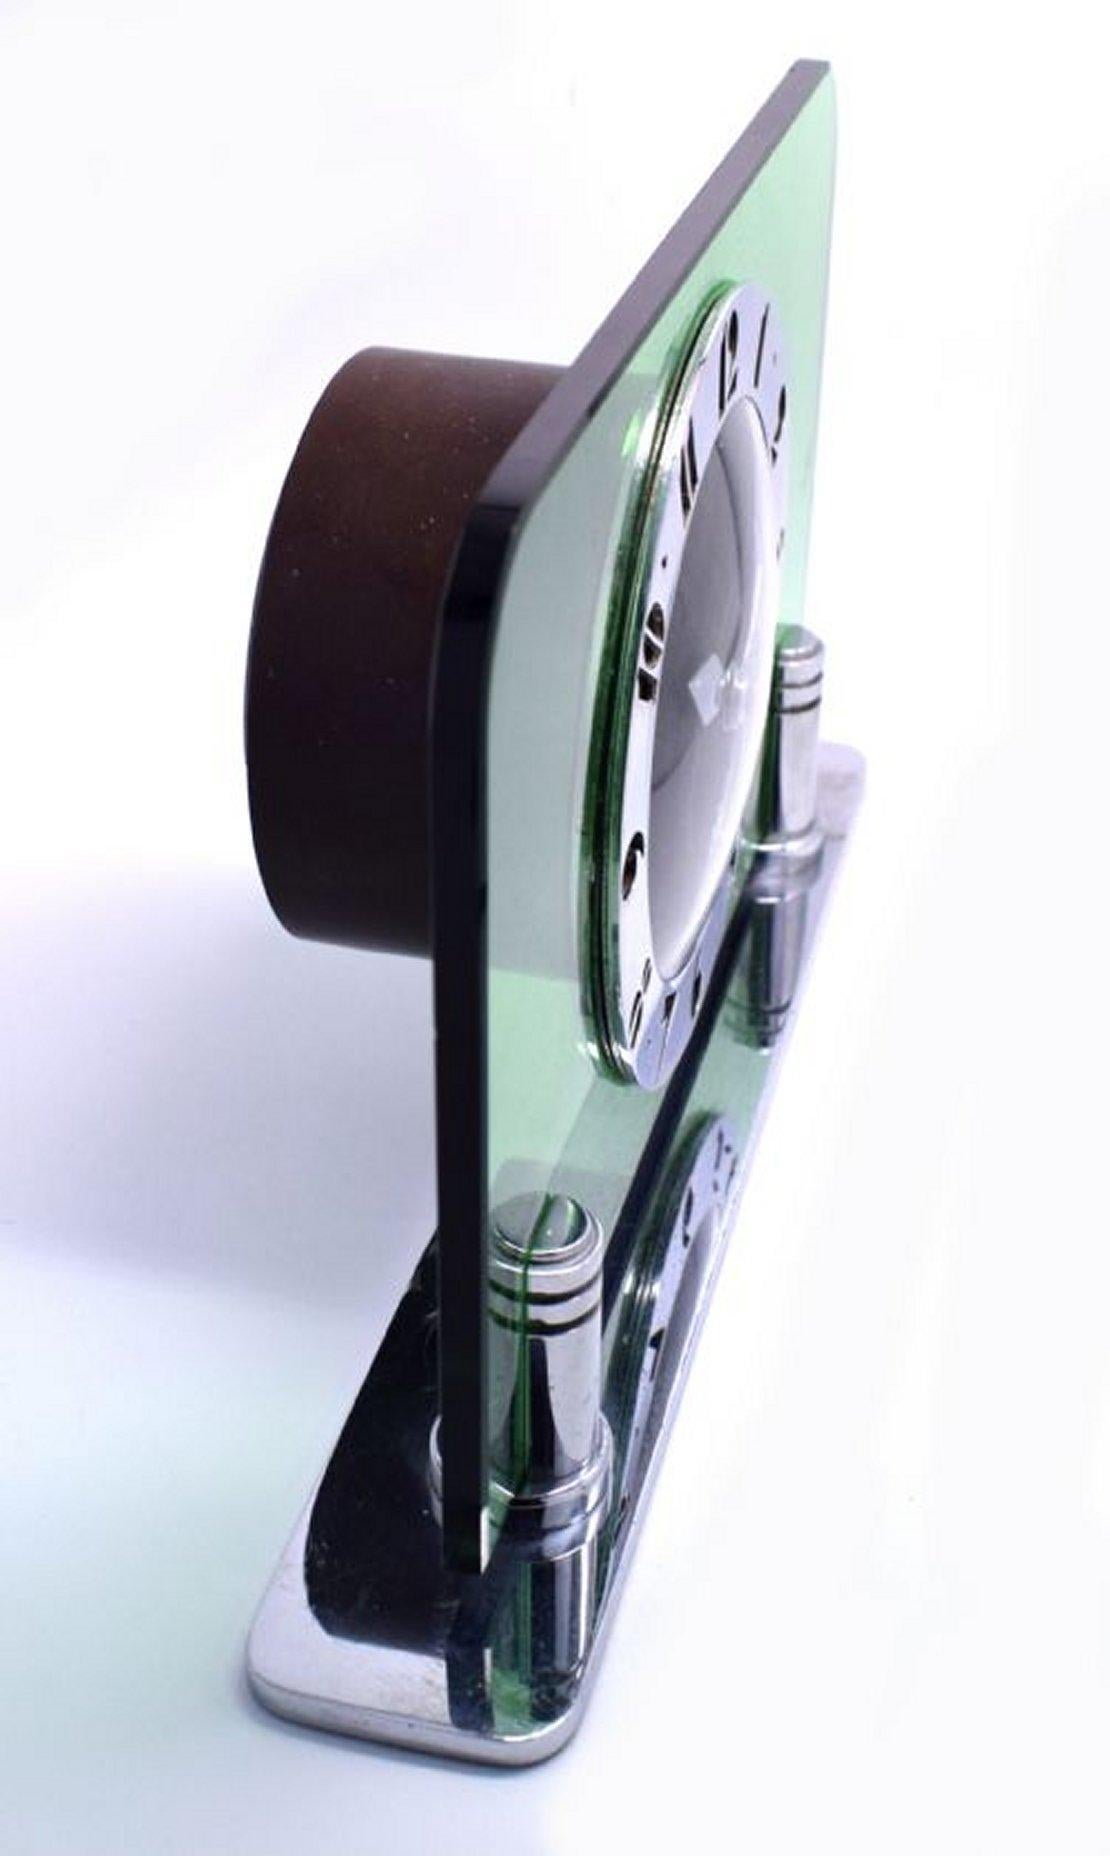 Art Deco Modernist Green Glass Electric Clock By Smiths Clockmakers, c1930 For Sale 5